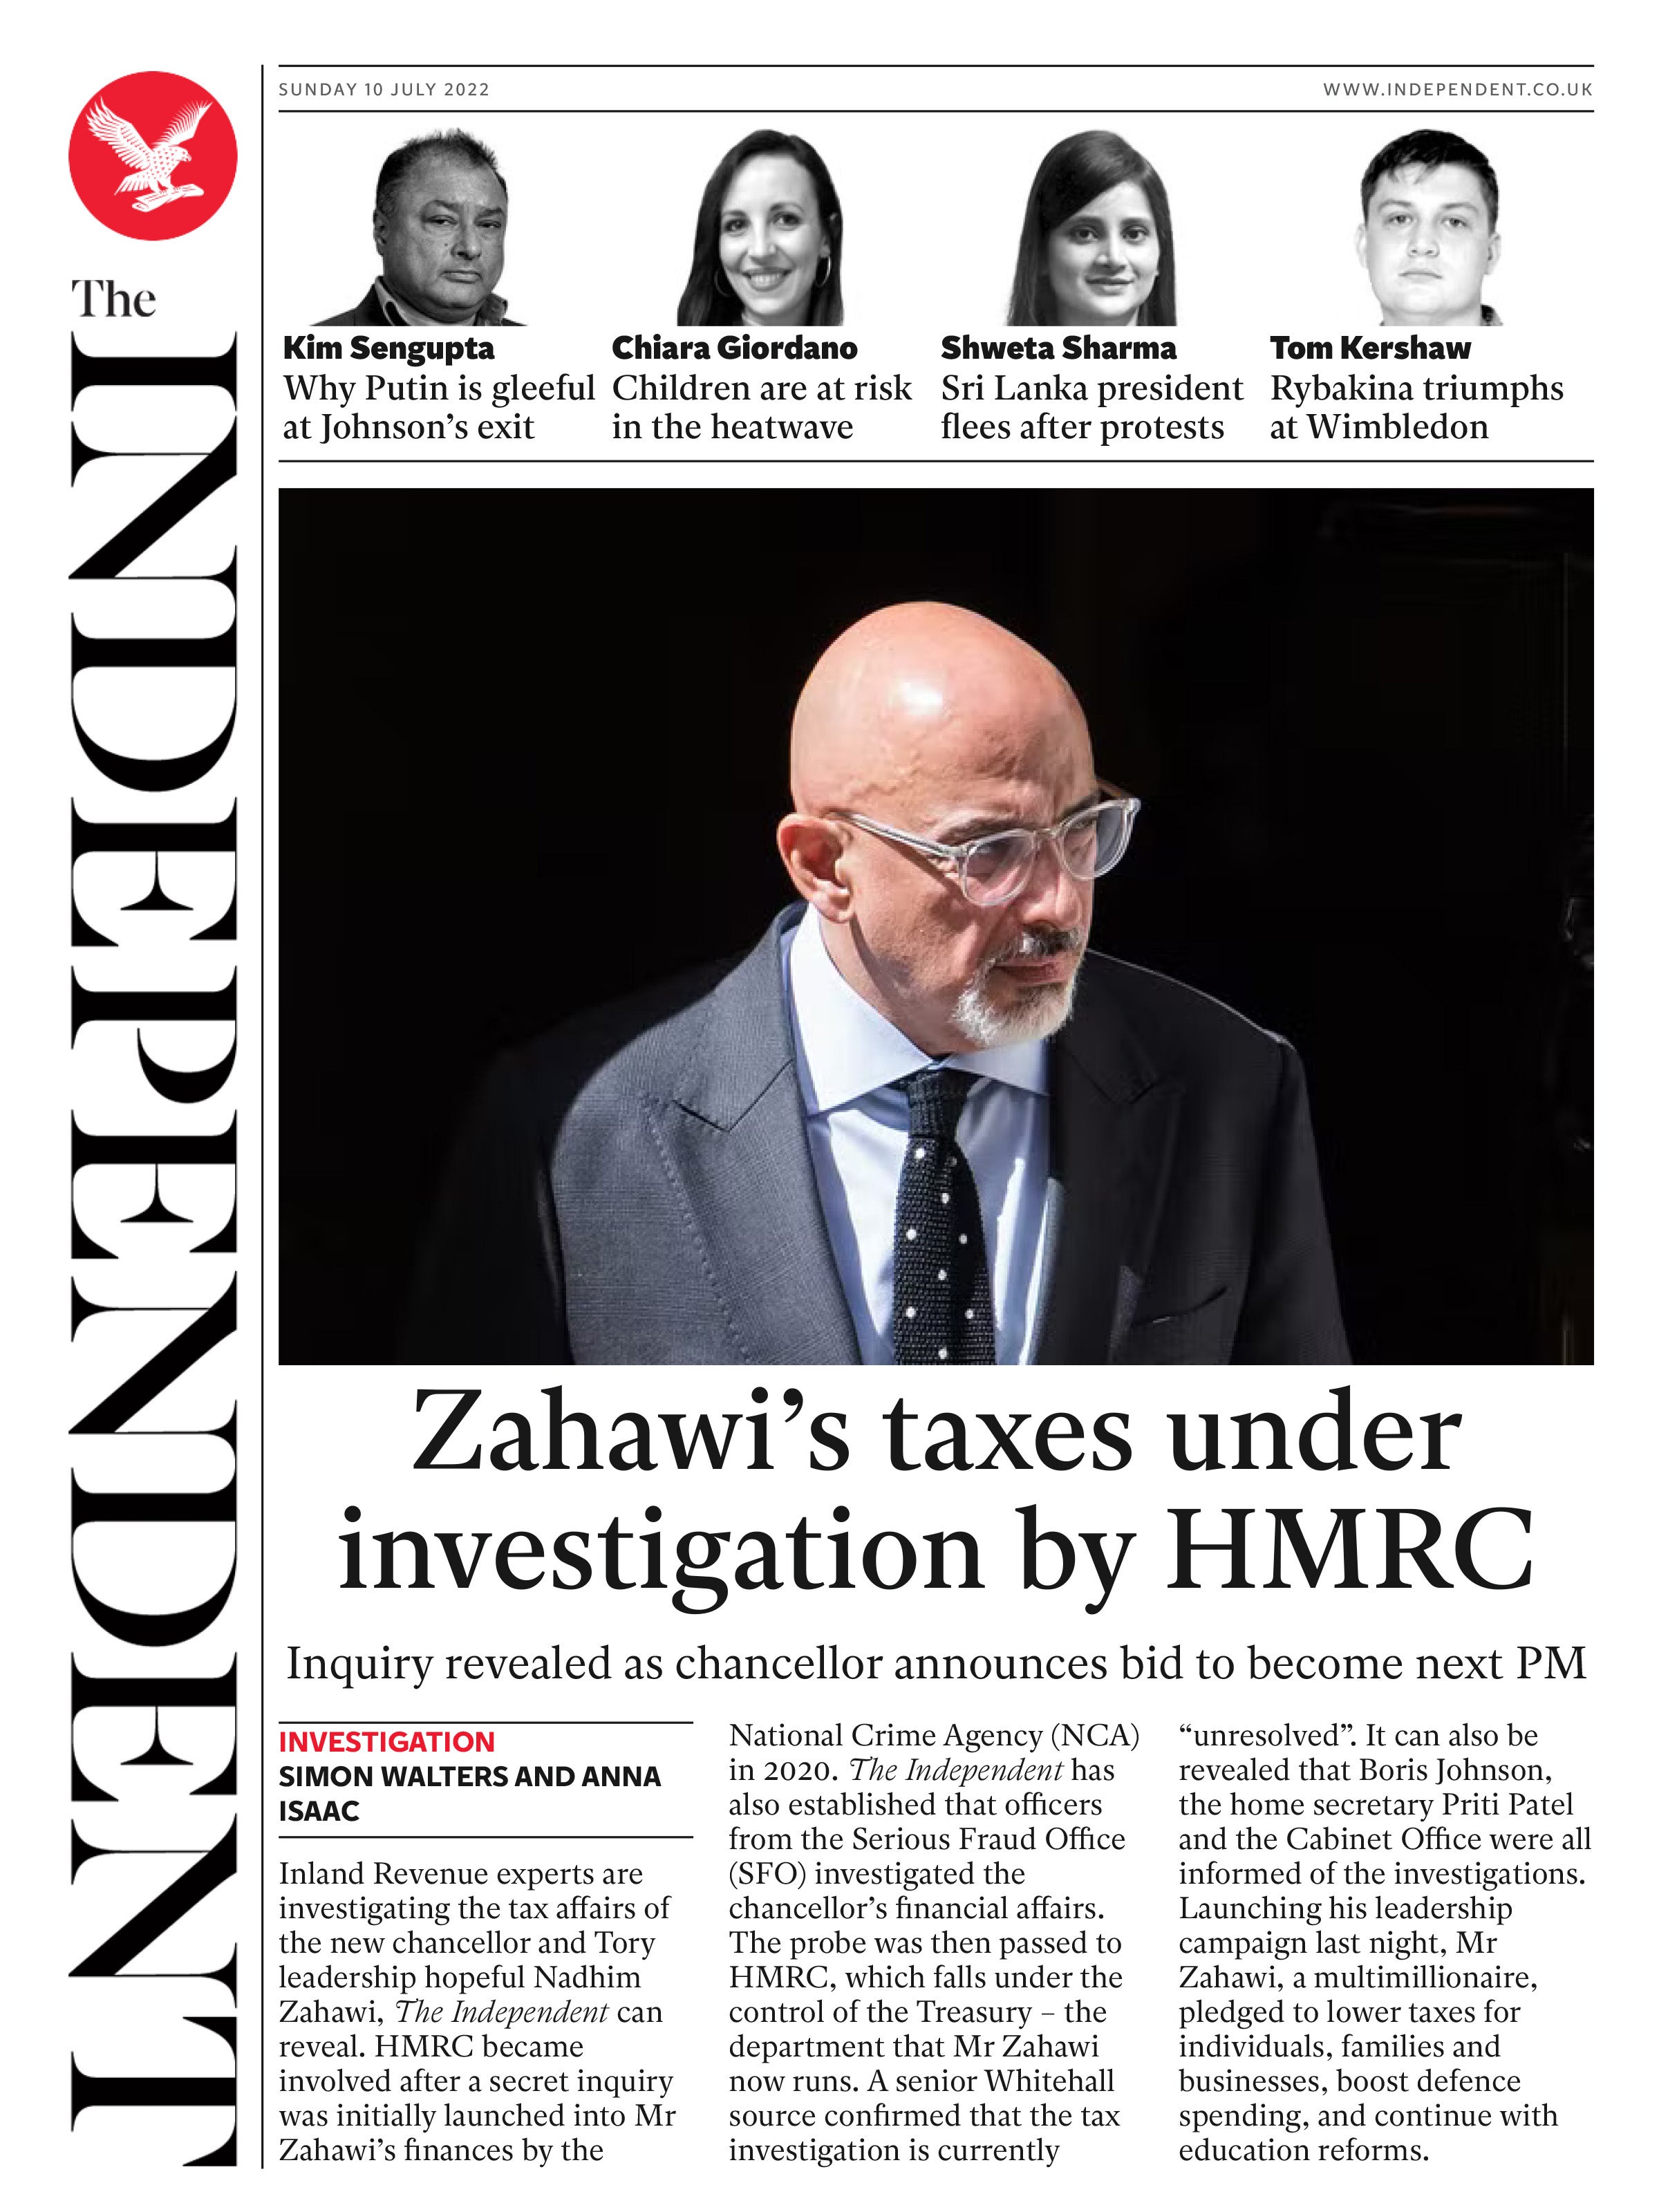 Mr Zahawi tried to stop this publication exposing the investigation by threatening to sue if we published